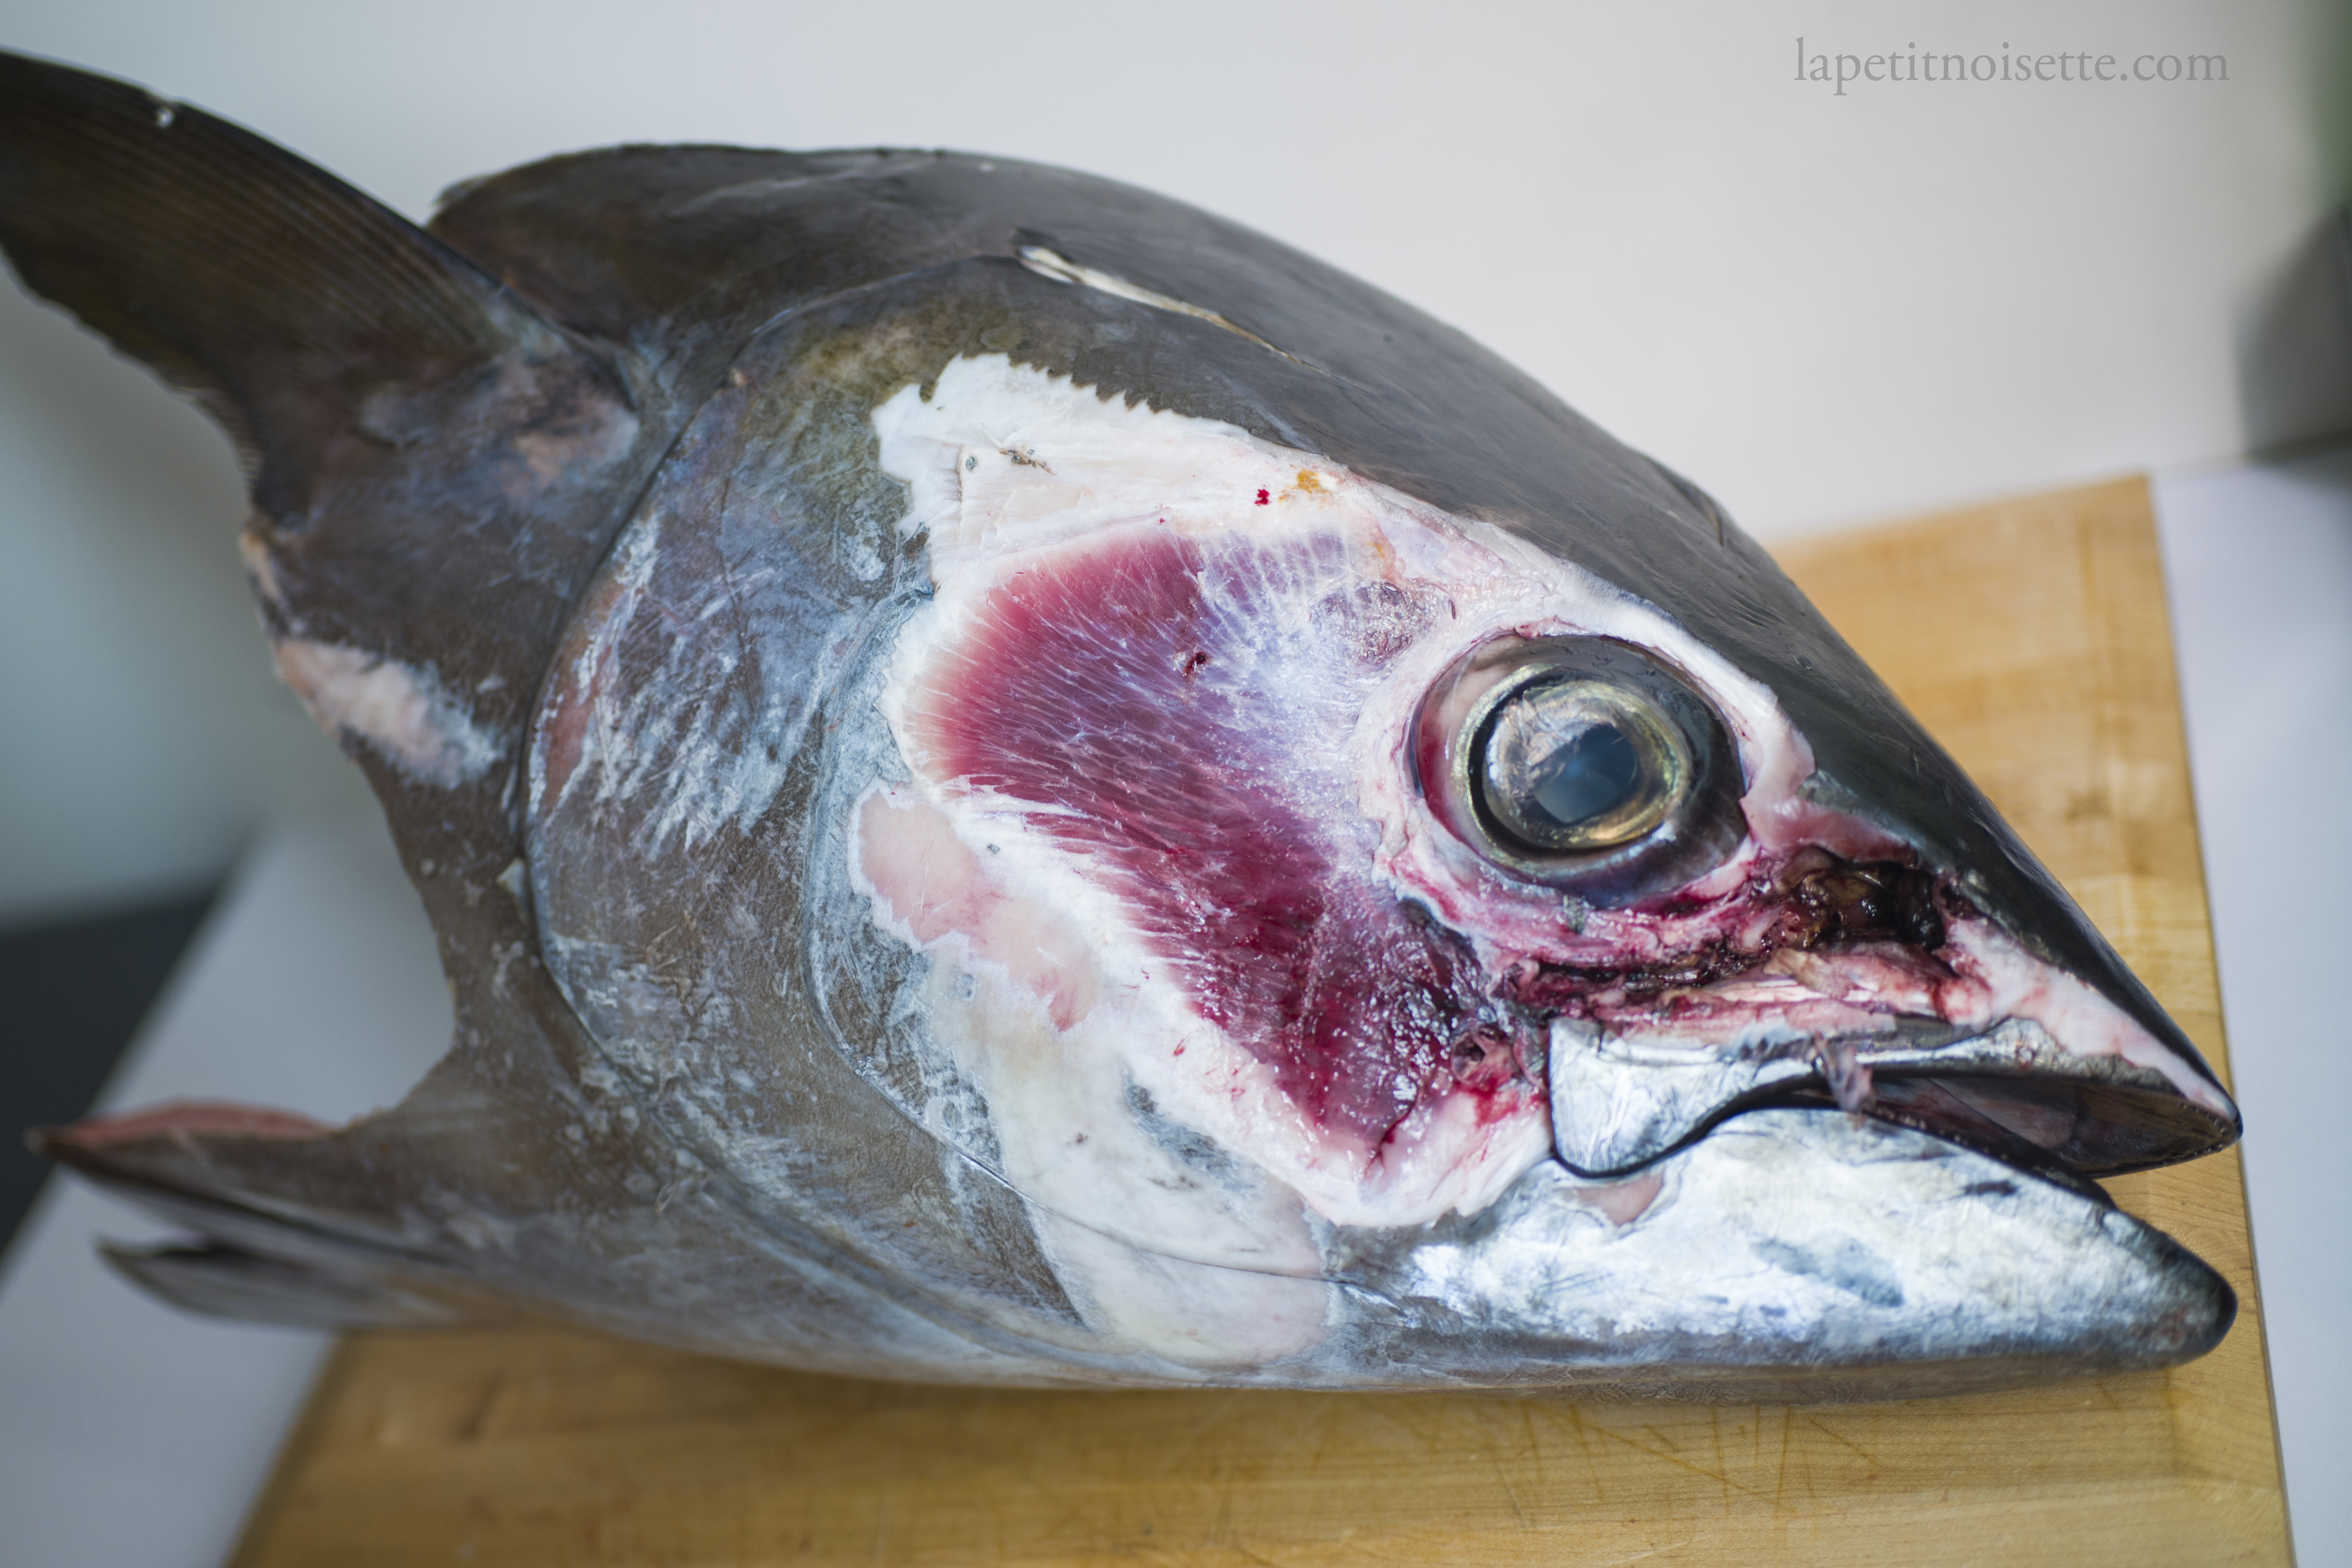 The cheek meat of a bluefin tuna still attached to the head.